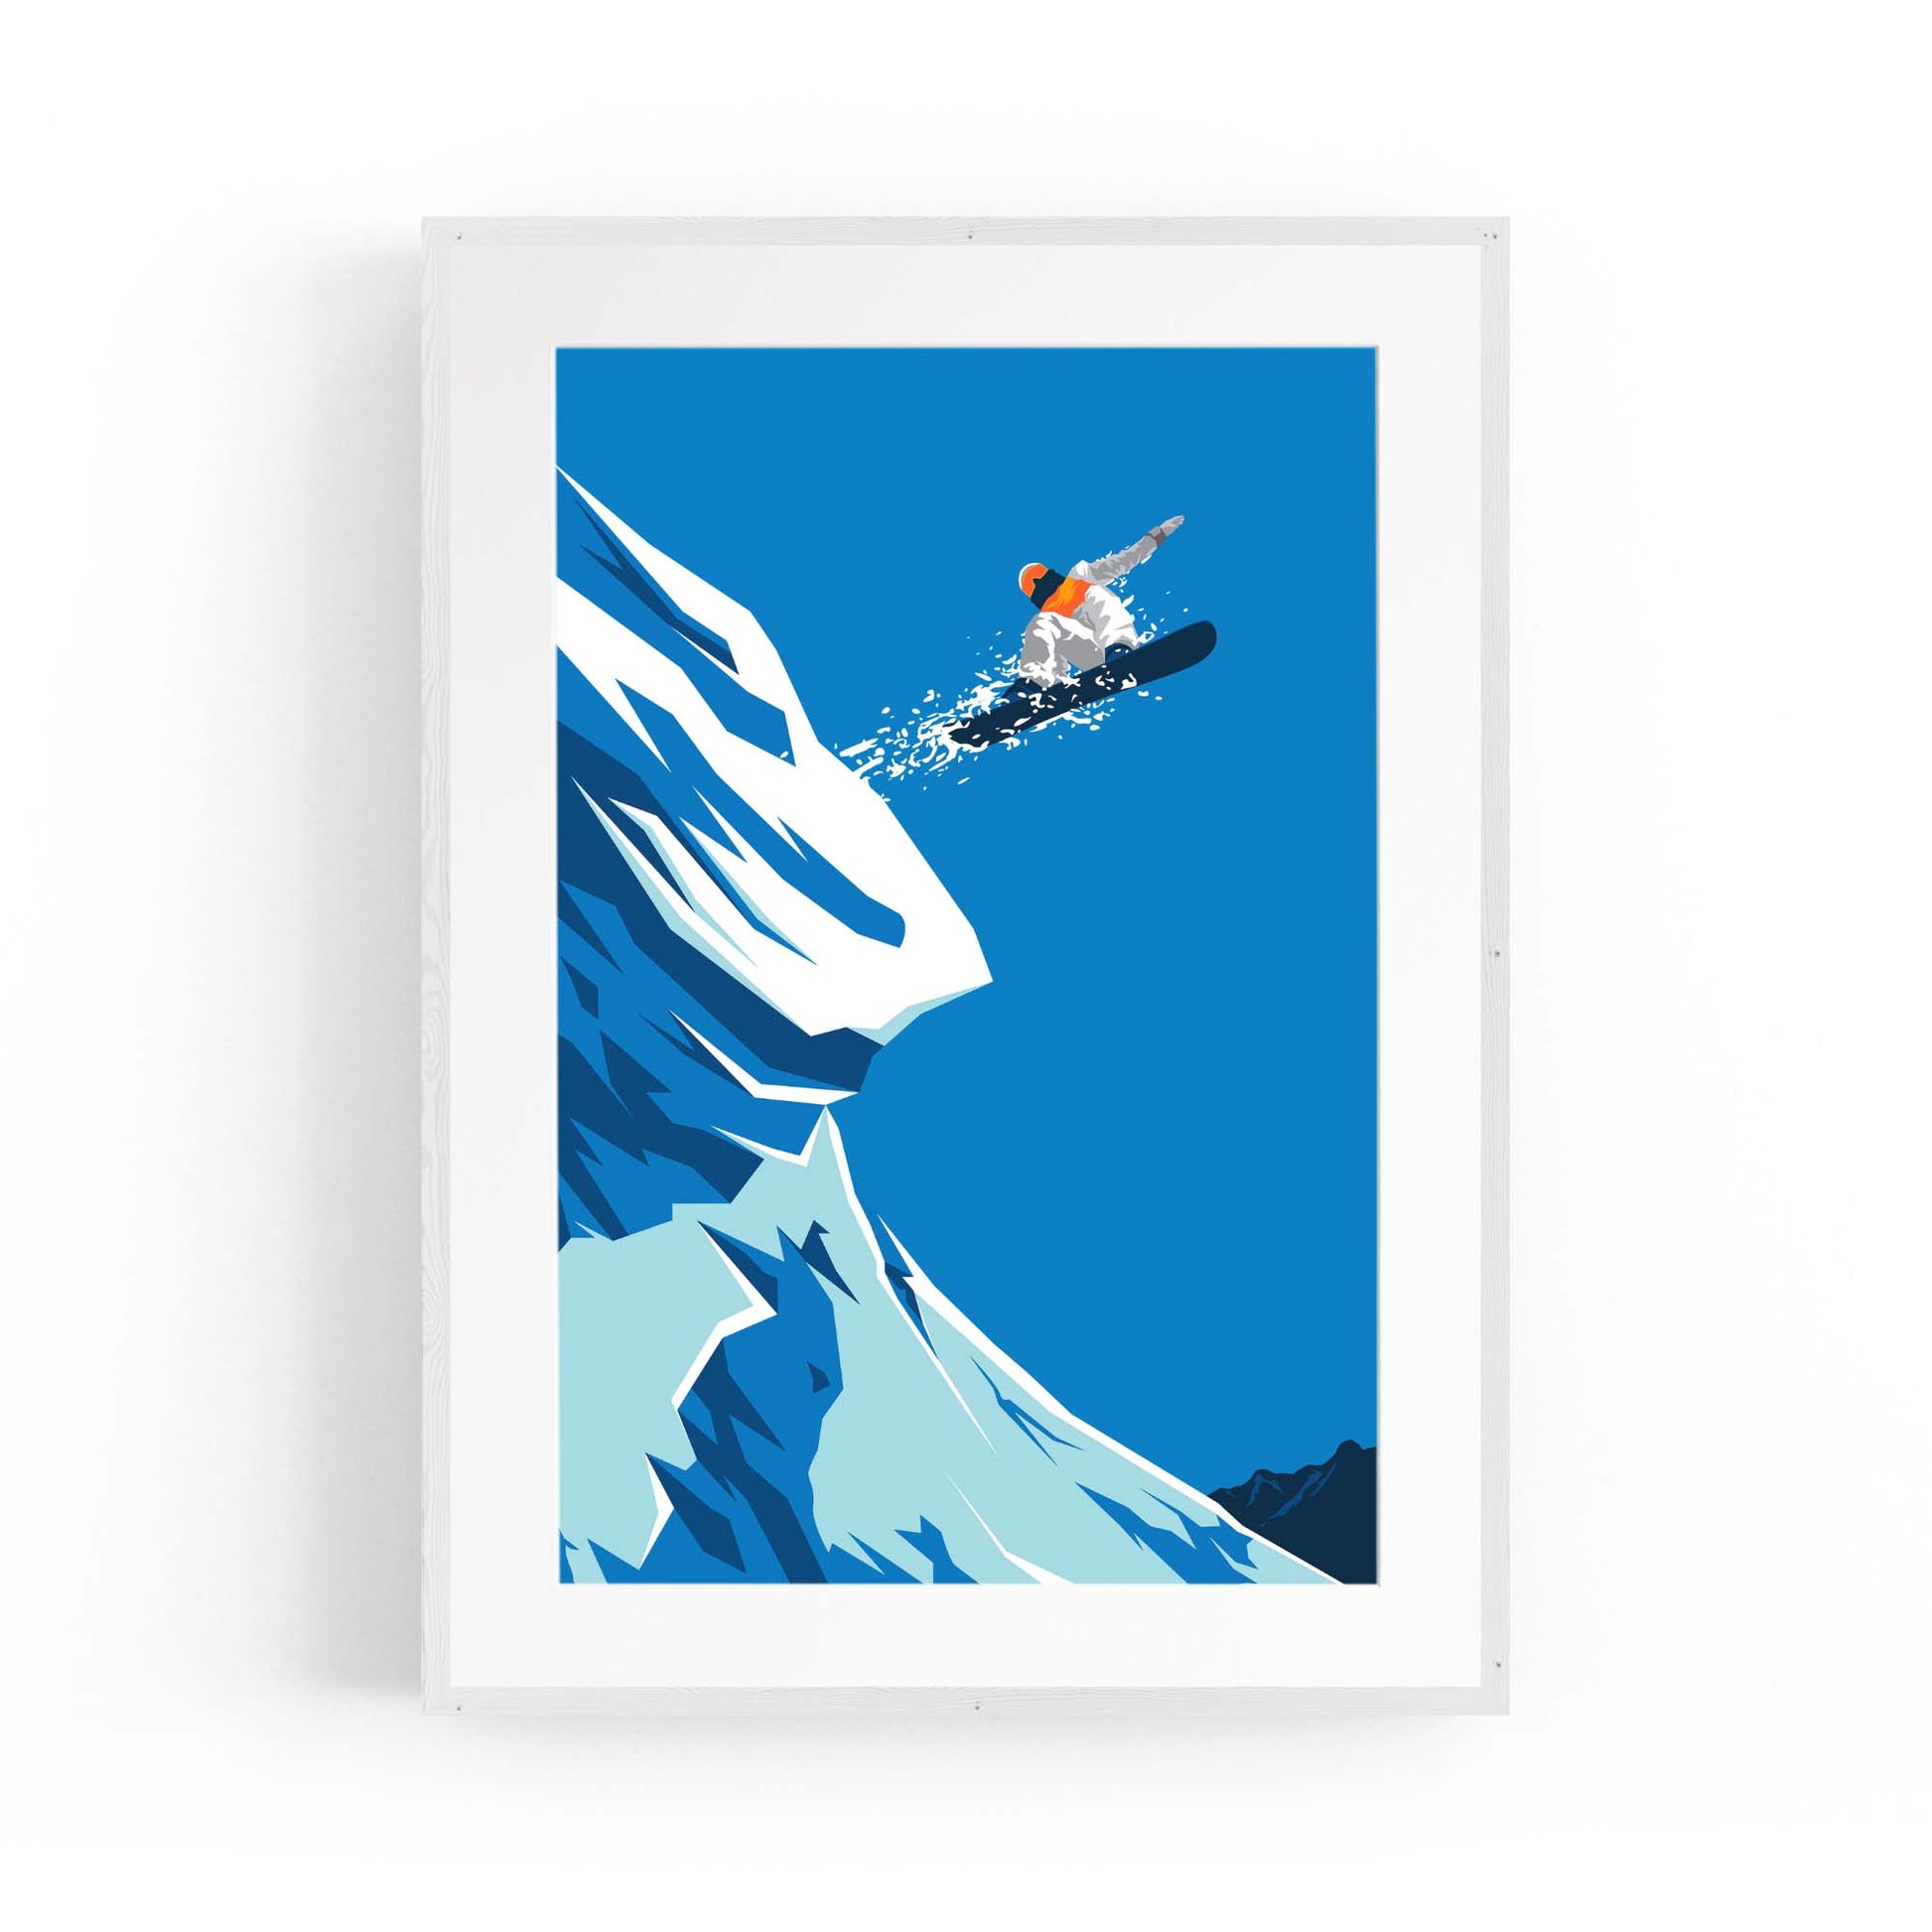 Retro Snowboard Vintage Winter Cabin Wall Art #1 - The Affordable Art Company